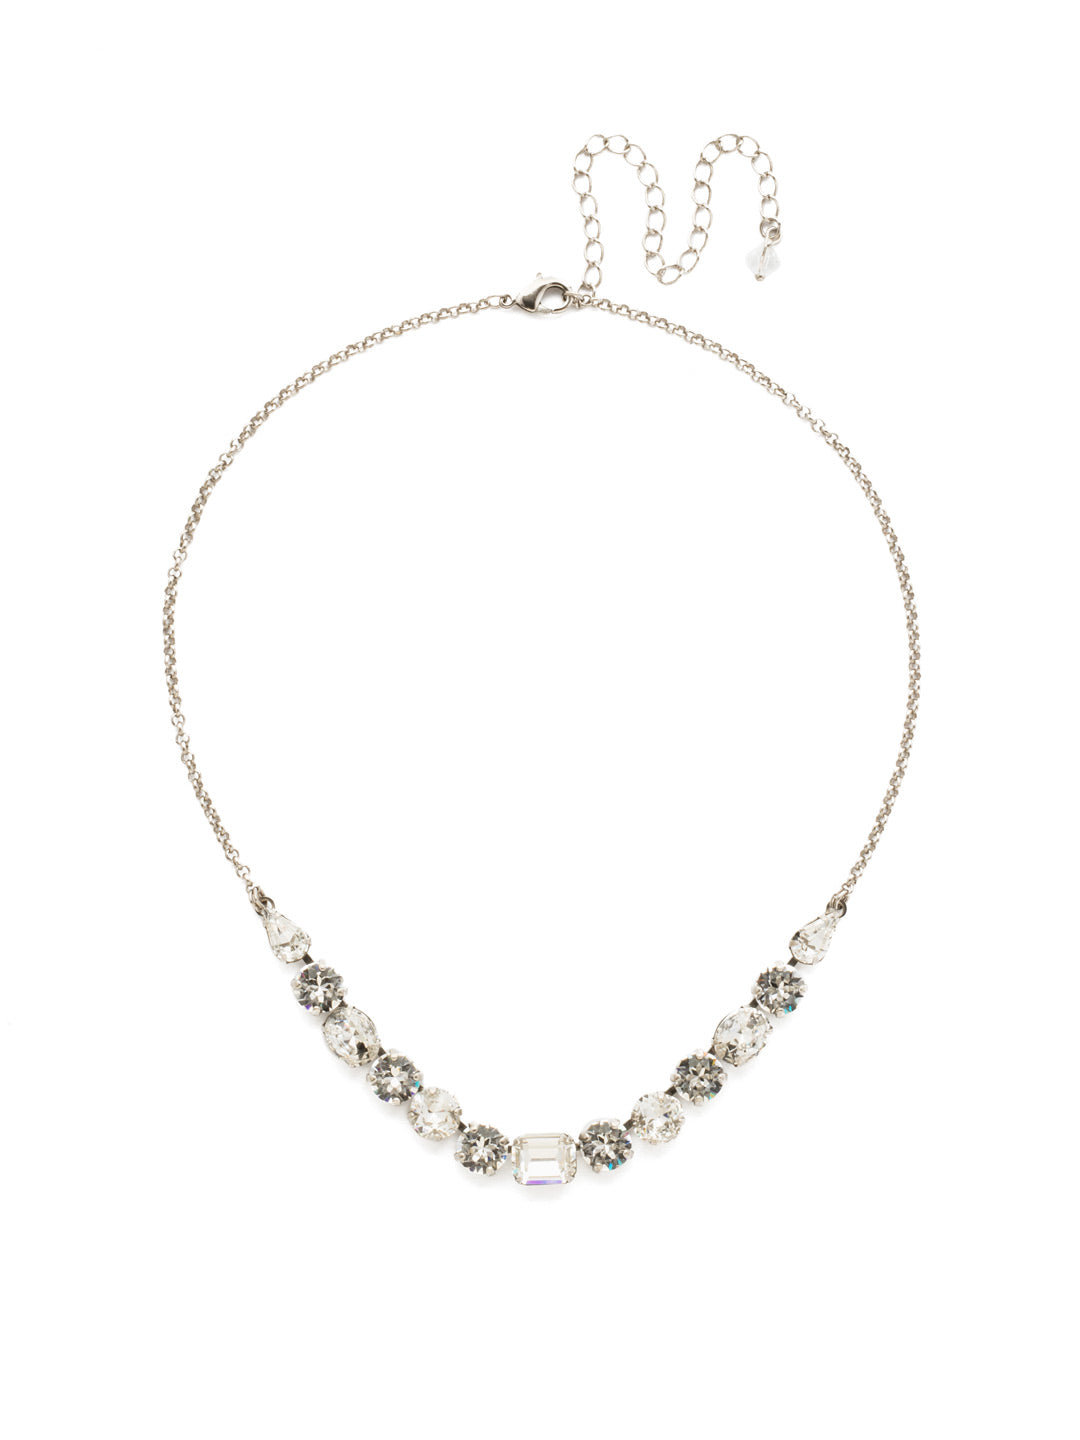 Tansy Half Line Tennis Necklace - NDQ14ASCRY - <p>Oval, round, emerald, pear and cushion cut crystals are accented by a delicate chain for subtle sparkle that looks great layered or worn solo. From Sorrelli's Crystal collection in our Antique Silver-tone finish.</p>